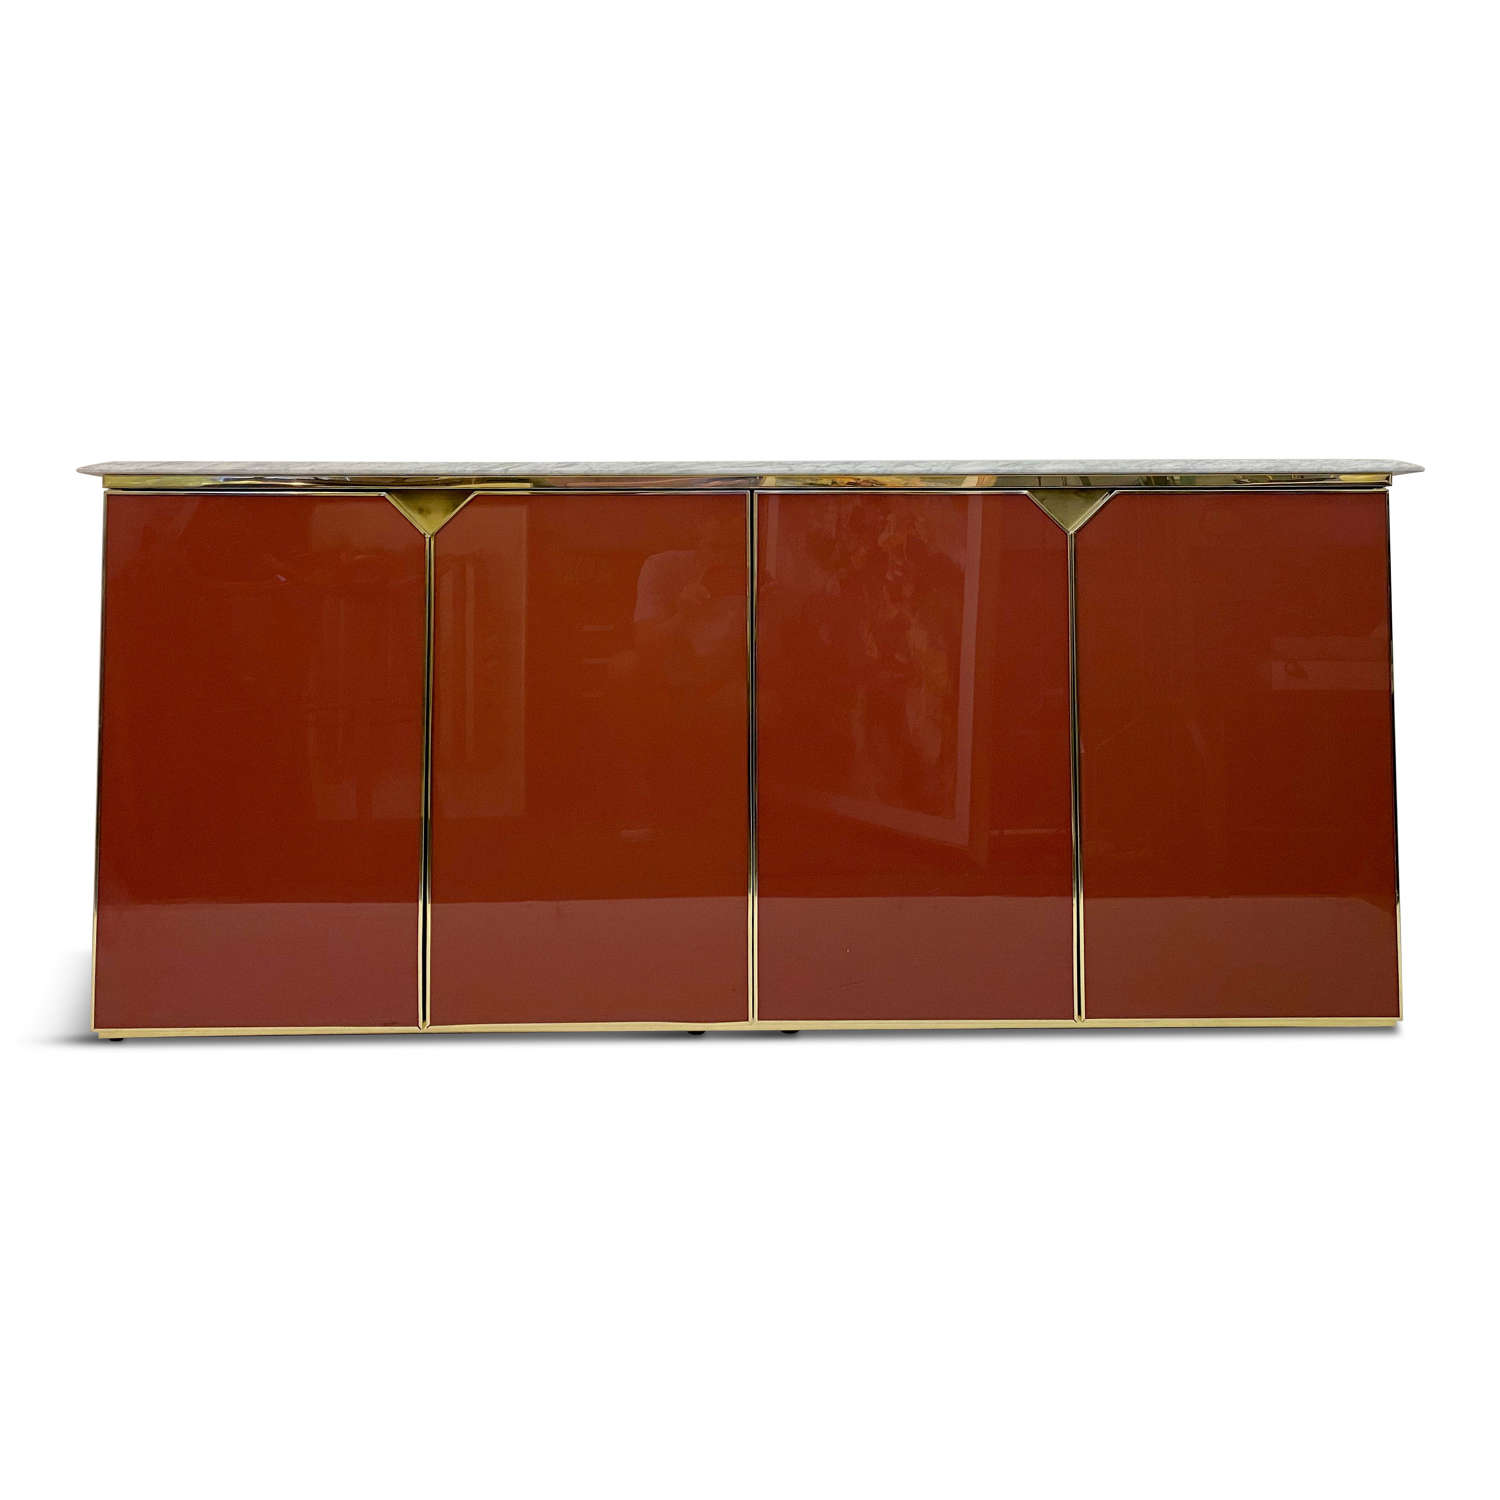 1970s Red Lacquered Sideboard with Marble Top